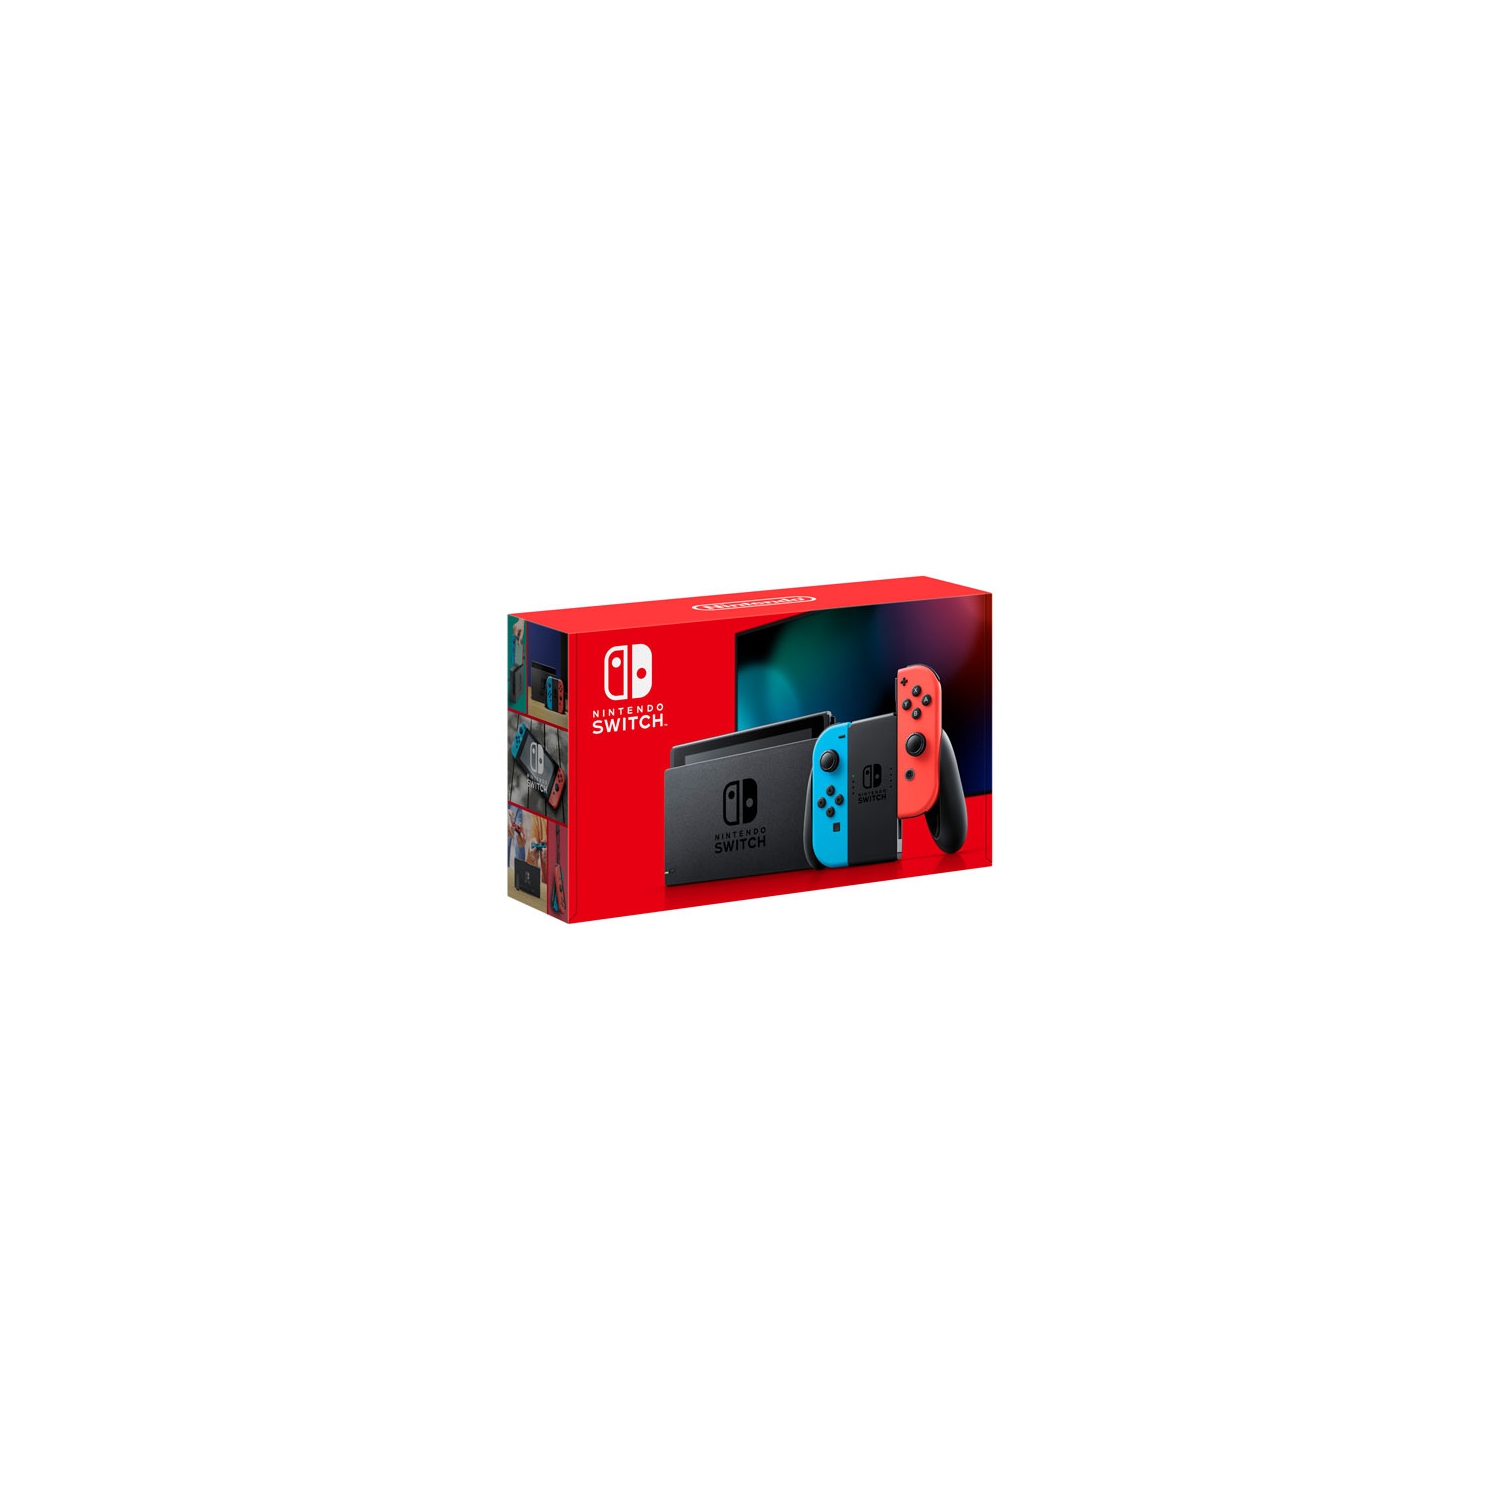 Open Box - Nintendo Switch Console with Neon Red/Blue Joy-Con (console only)